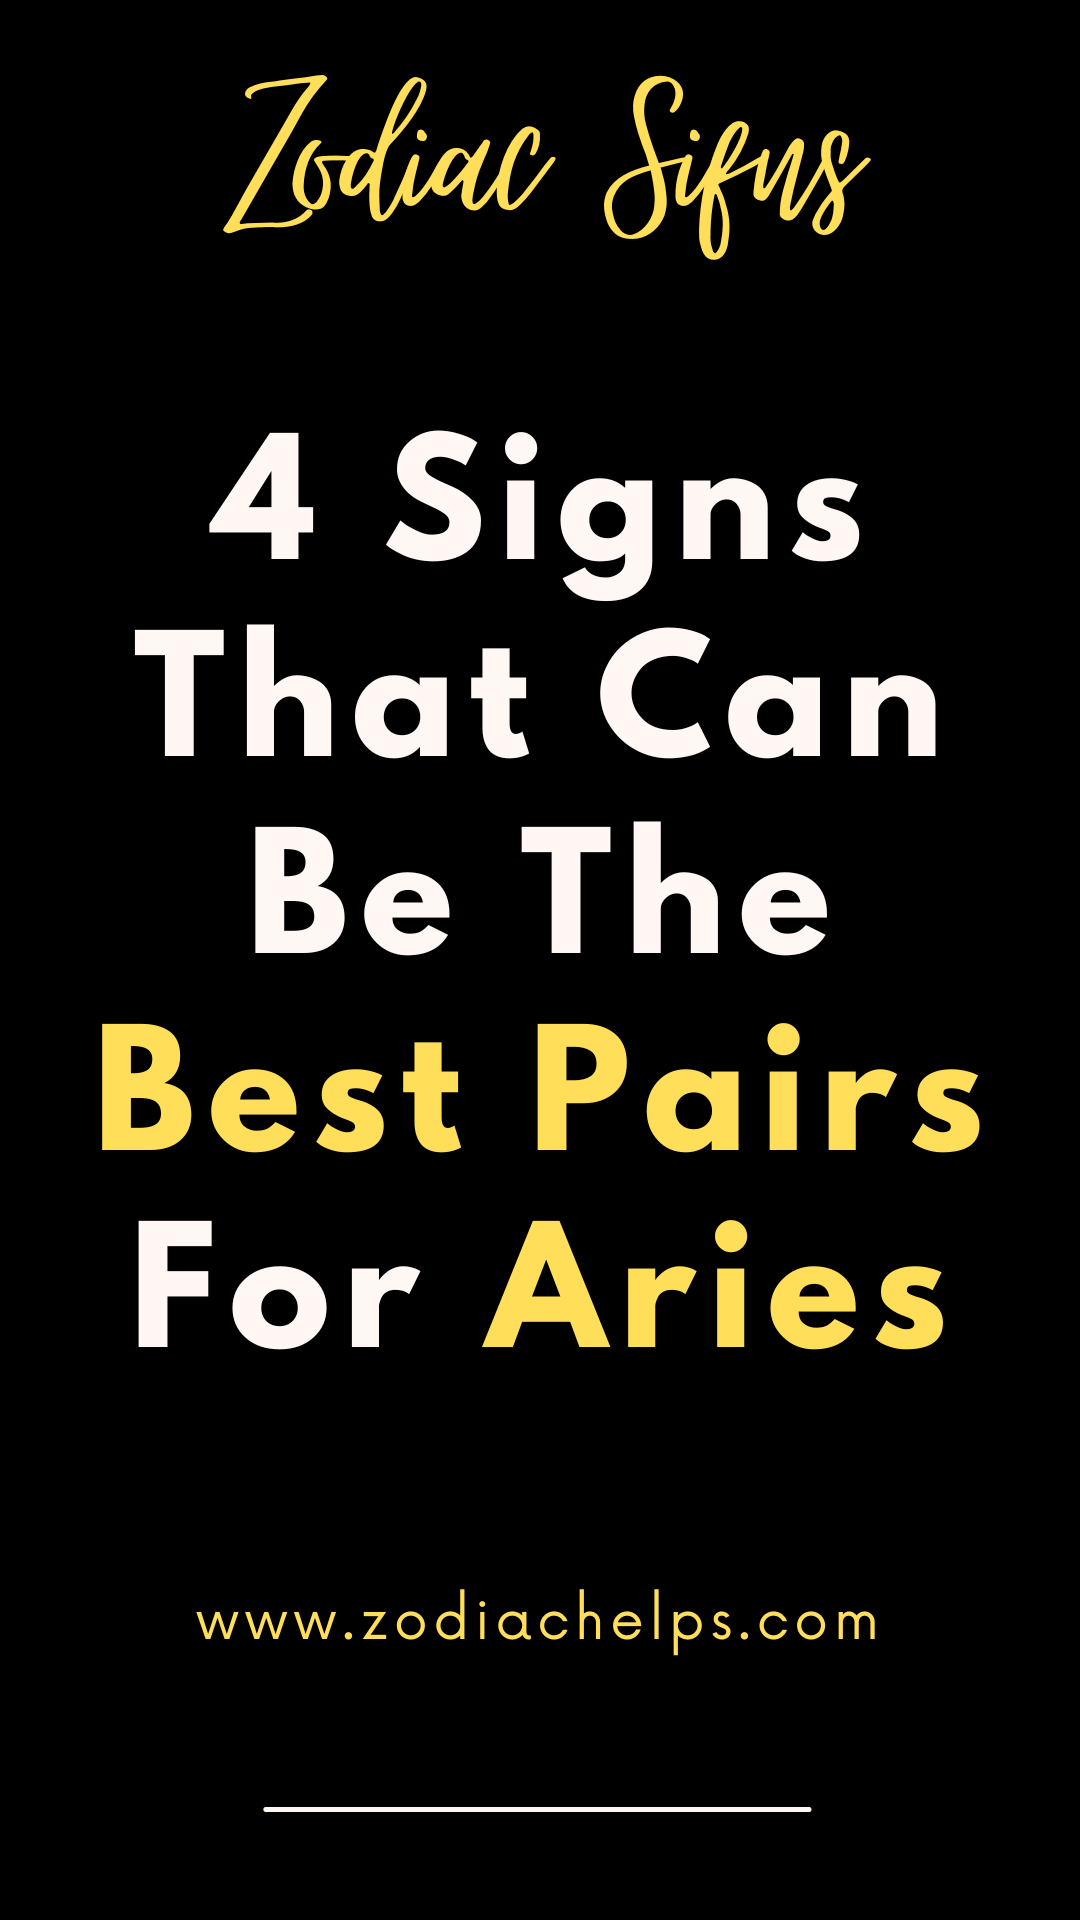 4 Signs That Can Be The Best Pairs For Aries